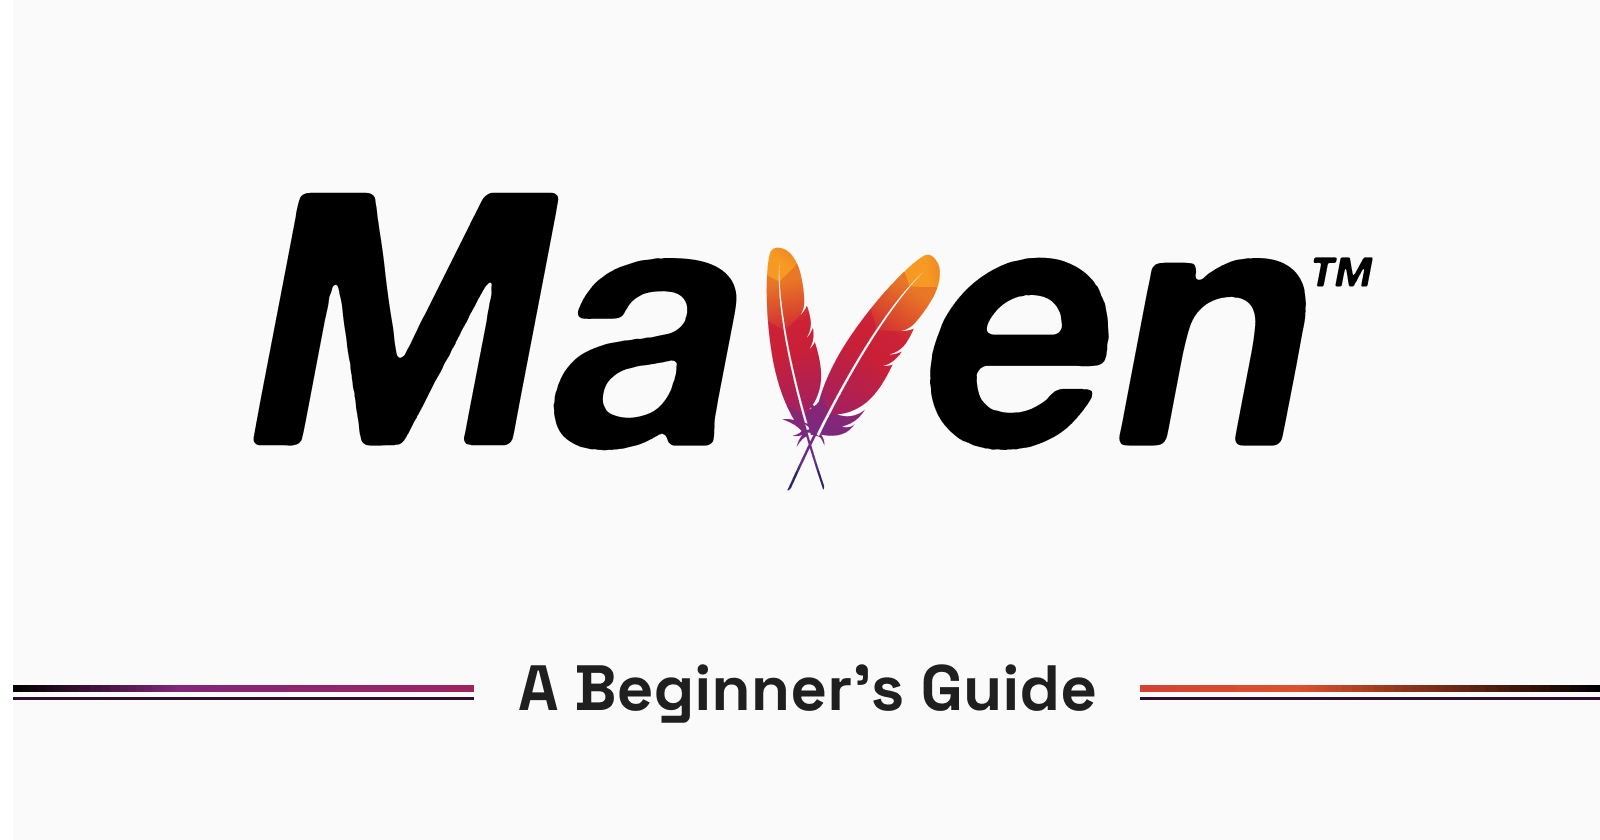 A Beginner's Guide to Apache Maven